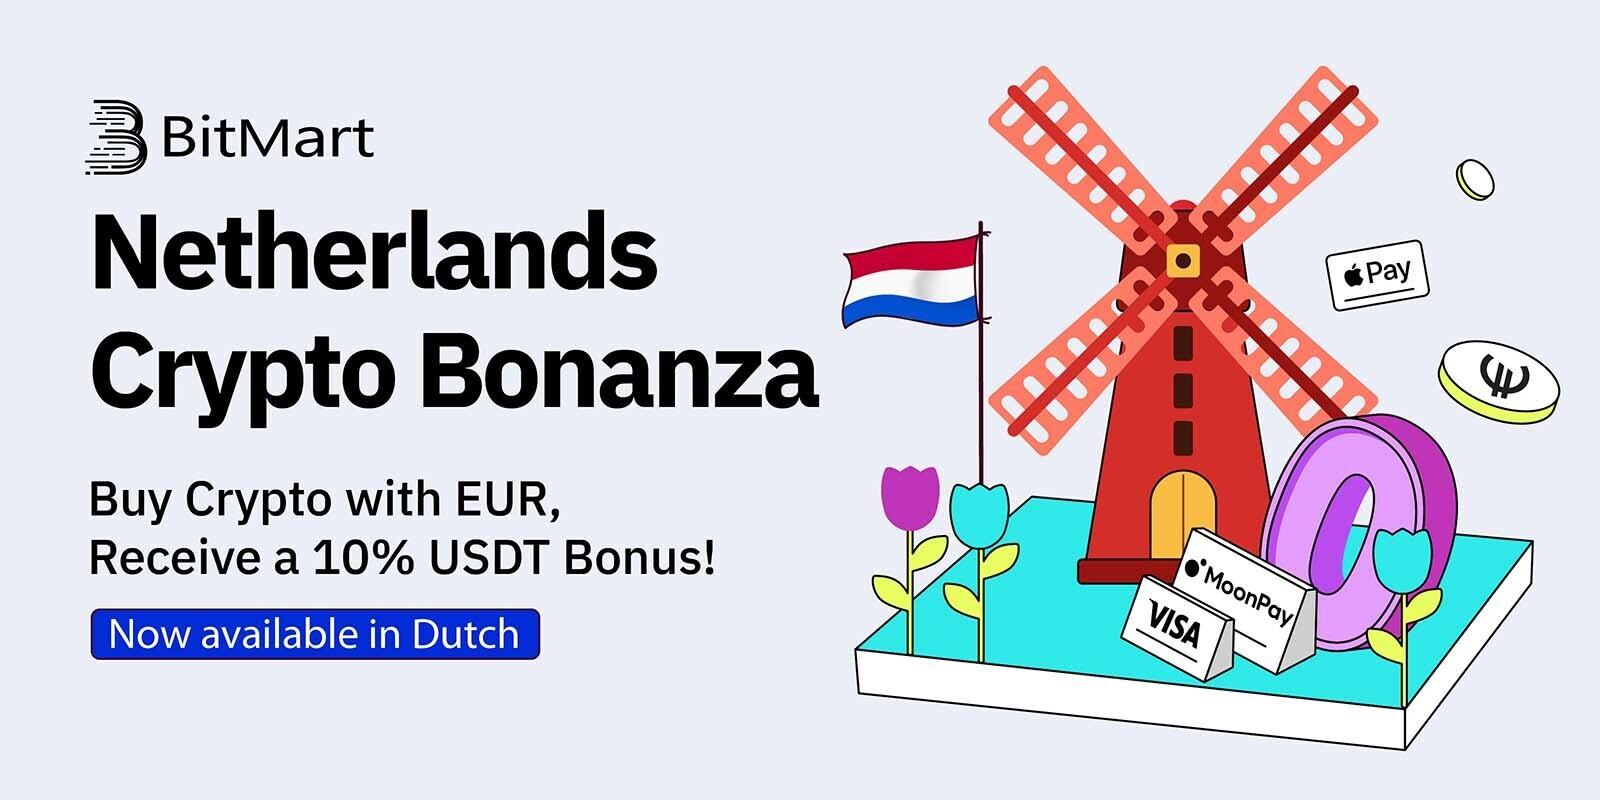 , BitMart Expands: Introducing Dutch Language and Exclusive Promotions for Netherlands Users